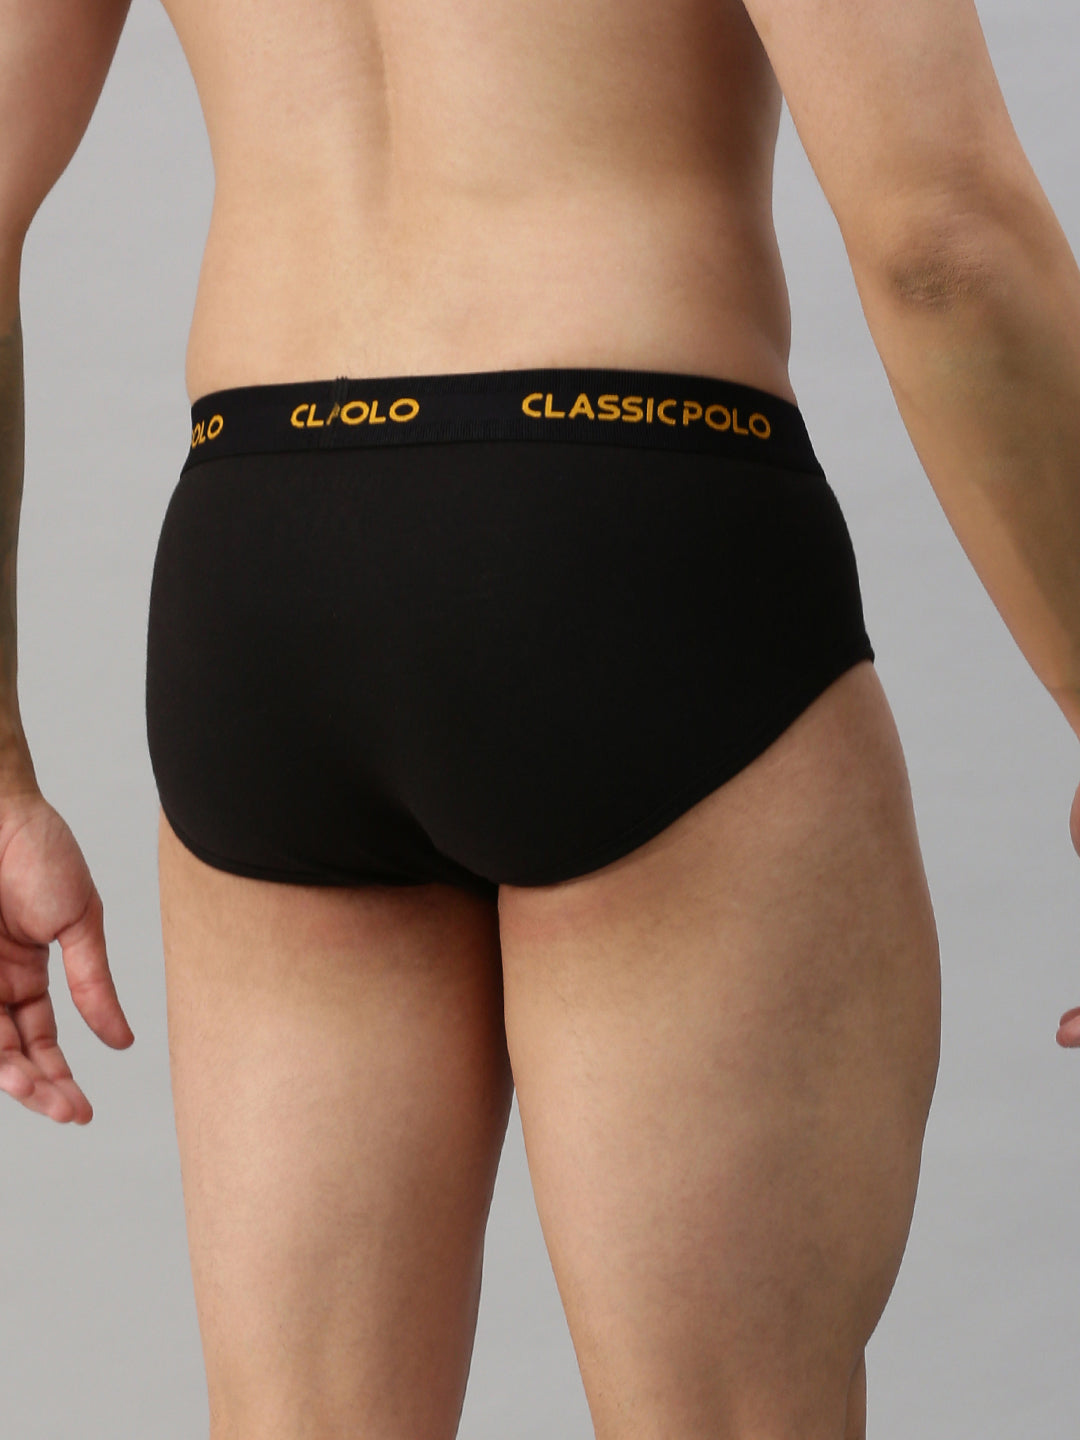 Classic Polo Men's Modal Solid Briefs | Scarce - White & Black (Pack of 2)